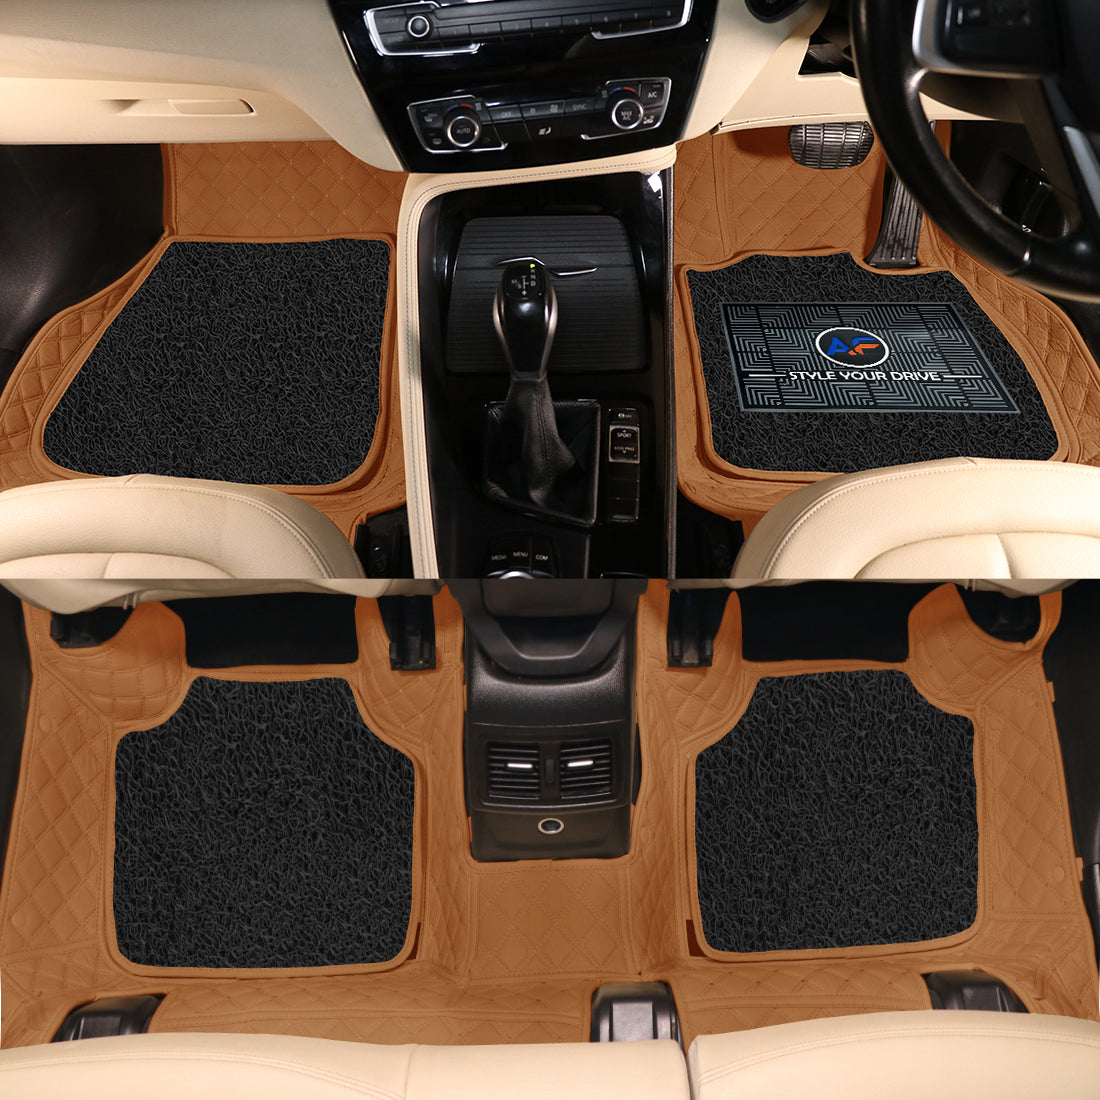 Toyota Vellfire 2020 7D Luxury Car Mat, All Weather Proof, Anti-Skid, 100% Waterproof & Odorless with Unique Diamond Fish Design (24mm Luxury PU Leather, 2 Rows)